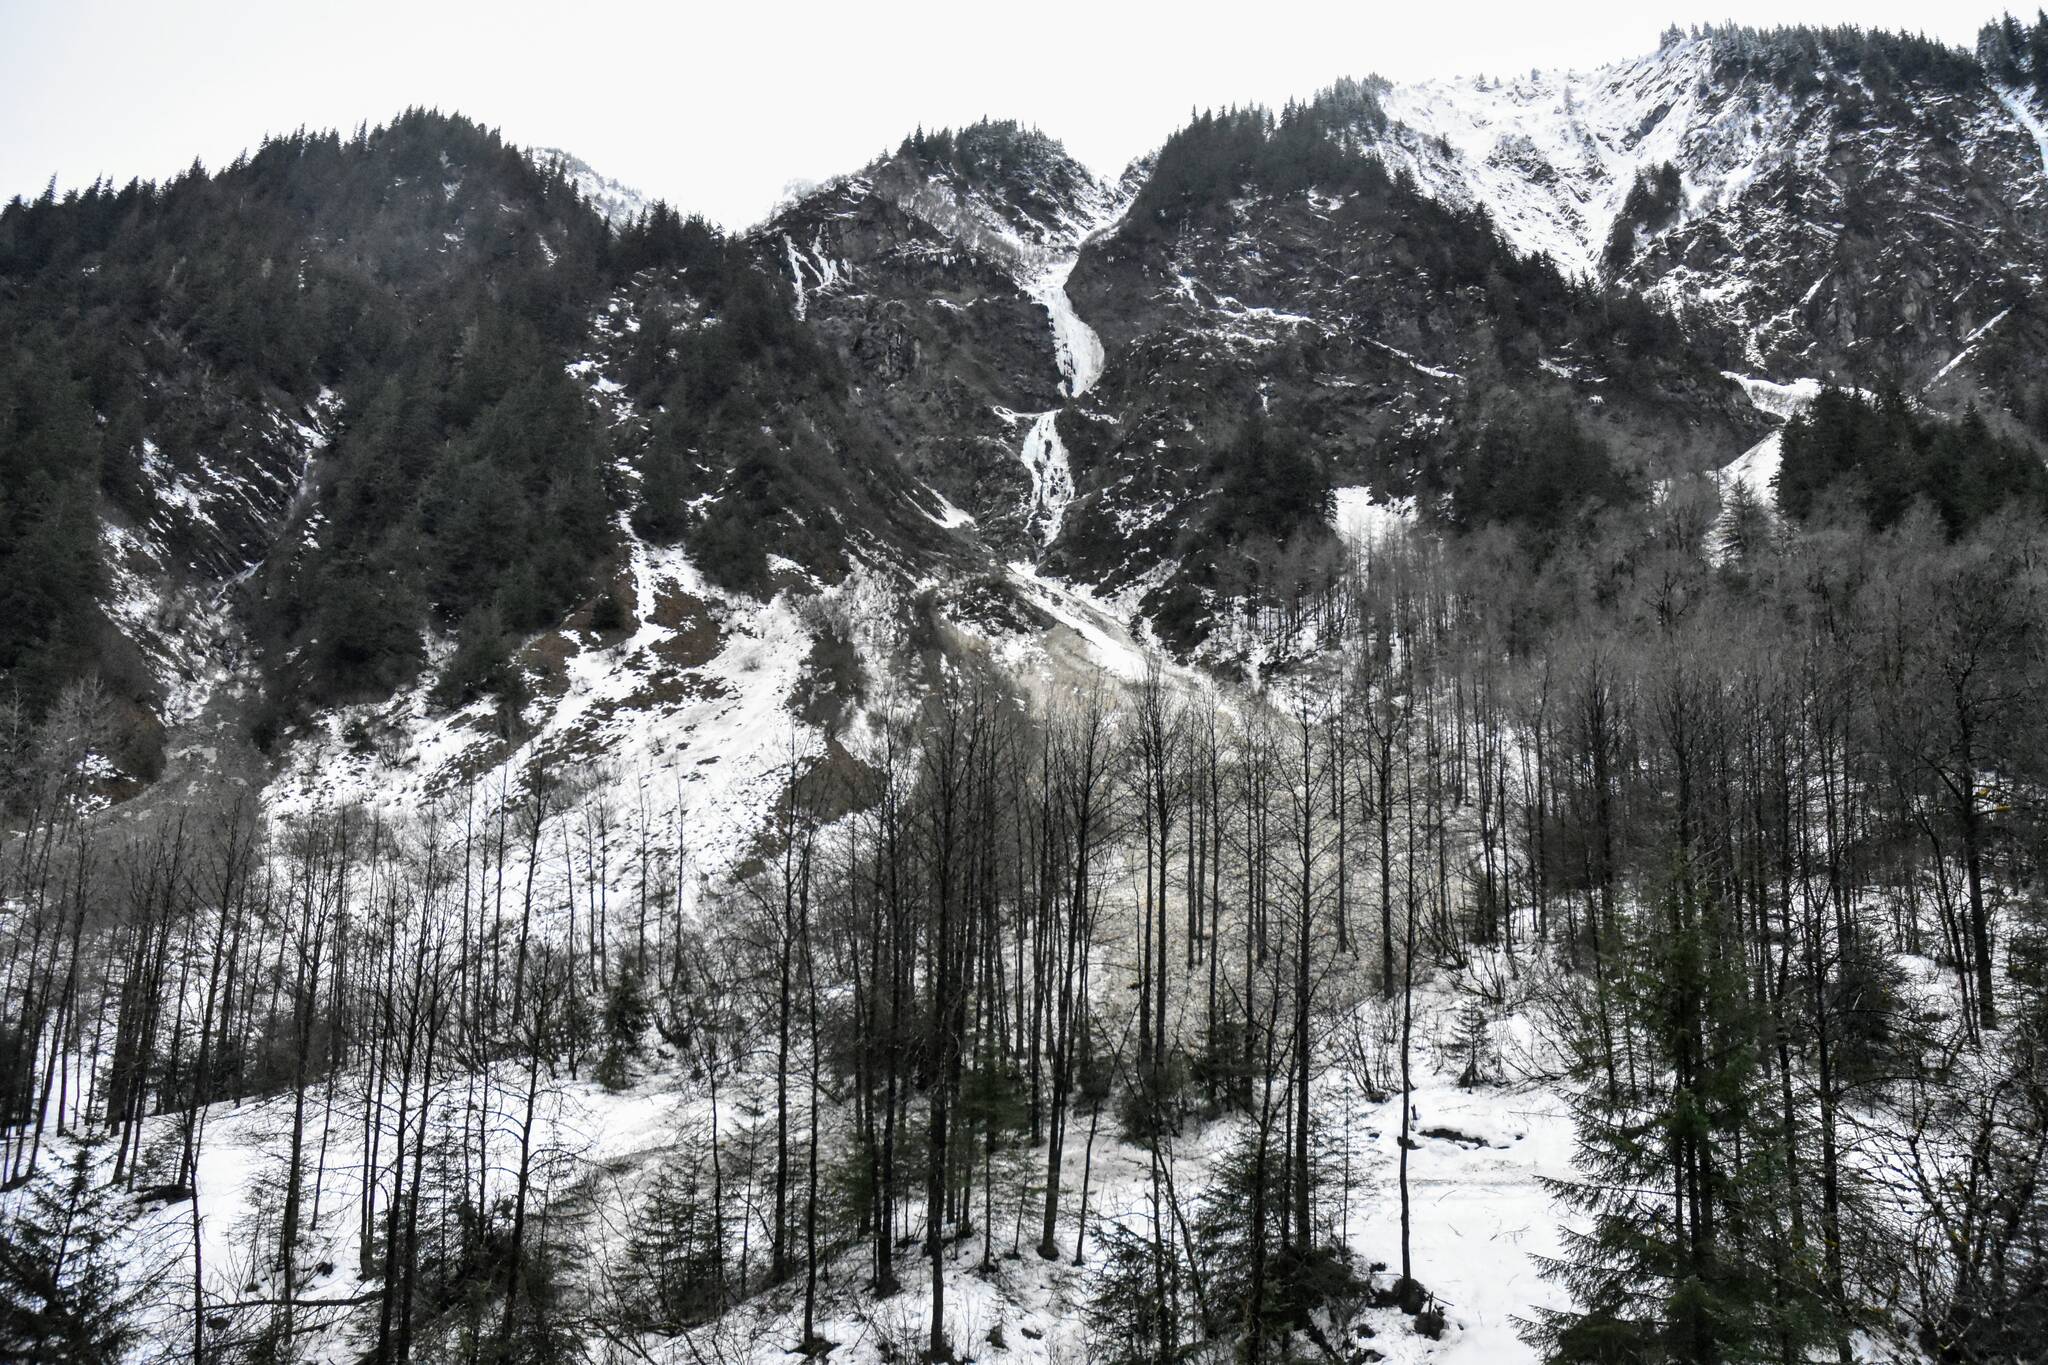 An avalanche above Basin Road covered the Gold Creek Flume Trail on Monday, Jan. 24, 2022, but didn’t affect any structures. Heavy rains over the weekend set records in Juneau and caused several small avalanches in the region. (Peter Segall / Juneau Empire)